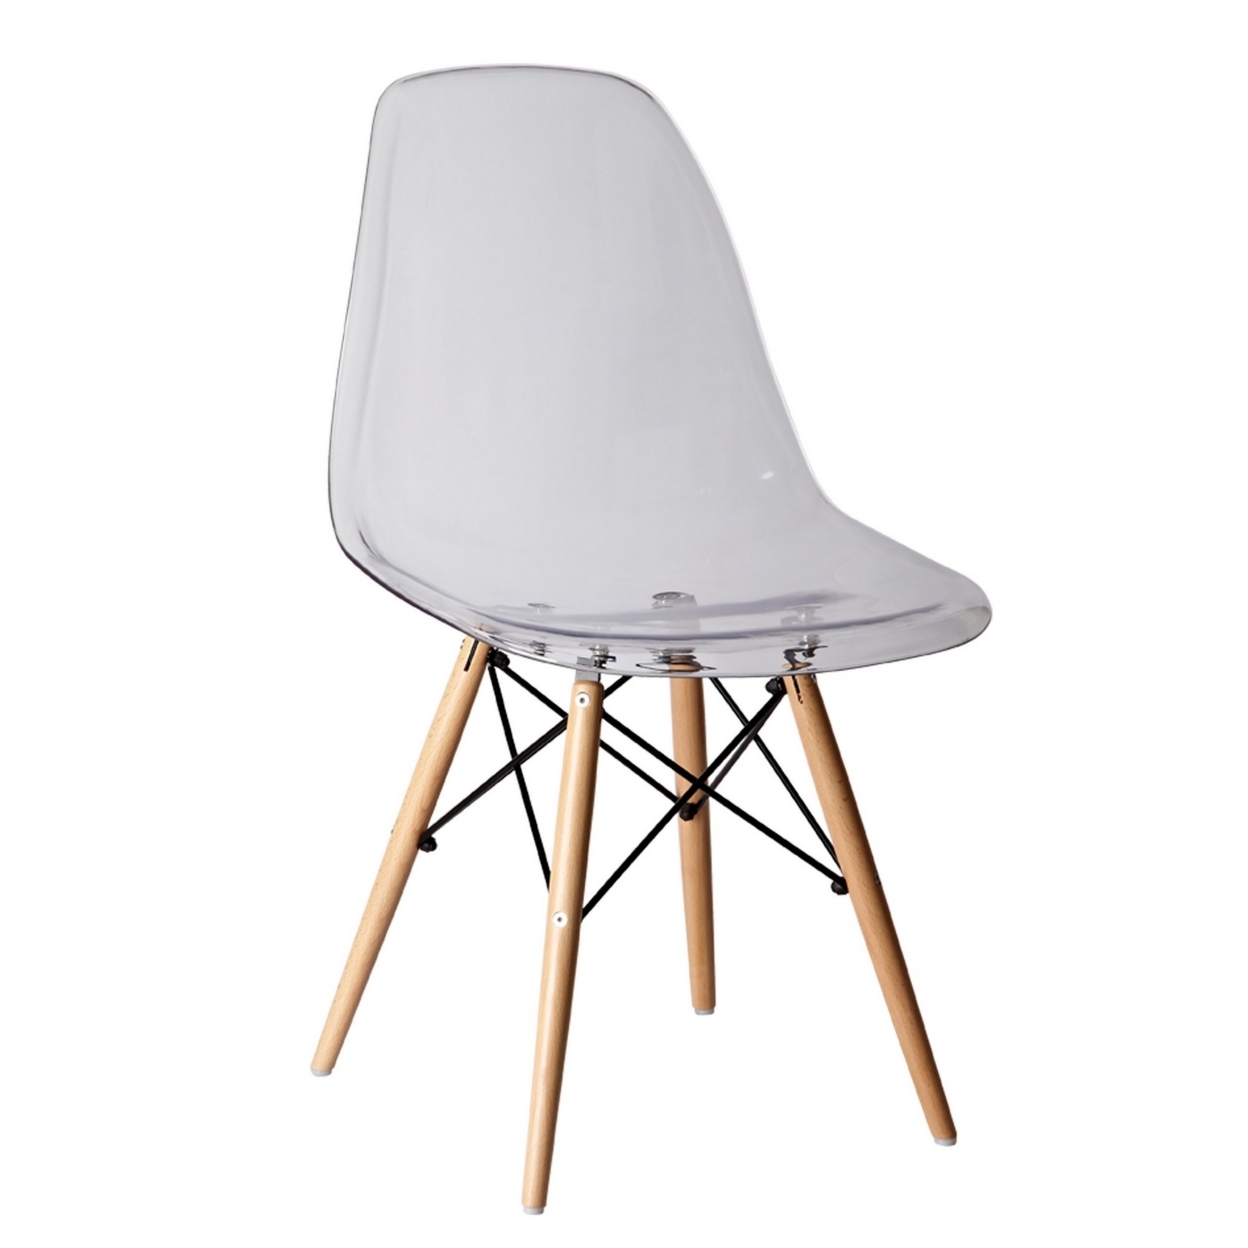 Louie 21 Inch Modern Side Chair, Wood Finished Legs, Translucent Seating- Saltoro Sherpi